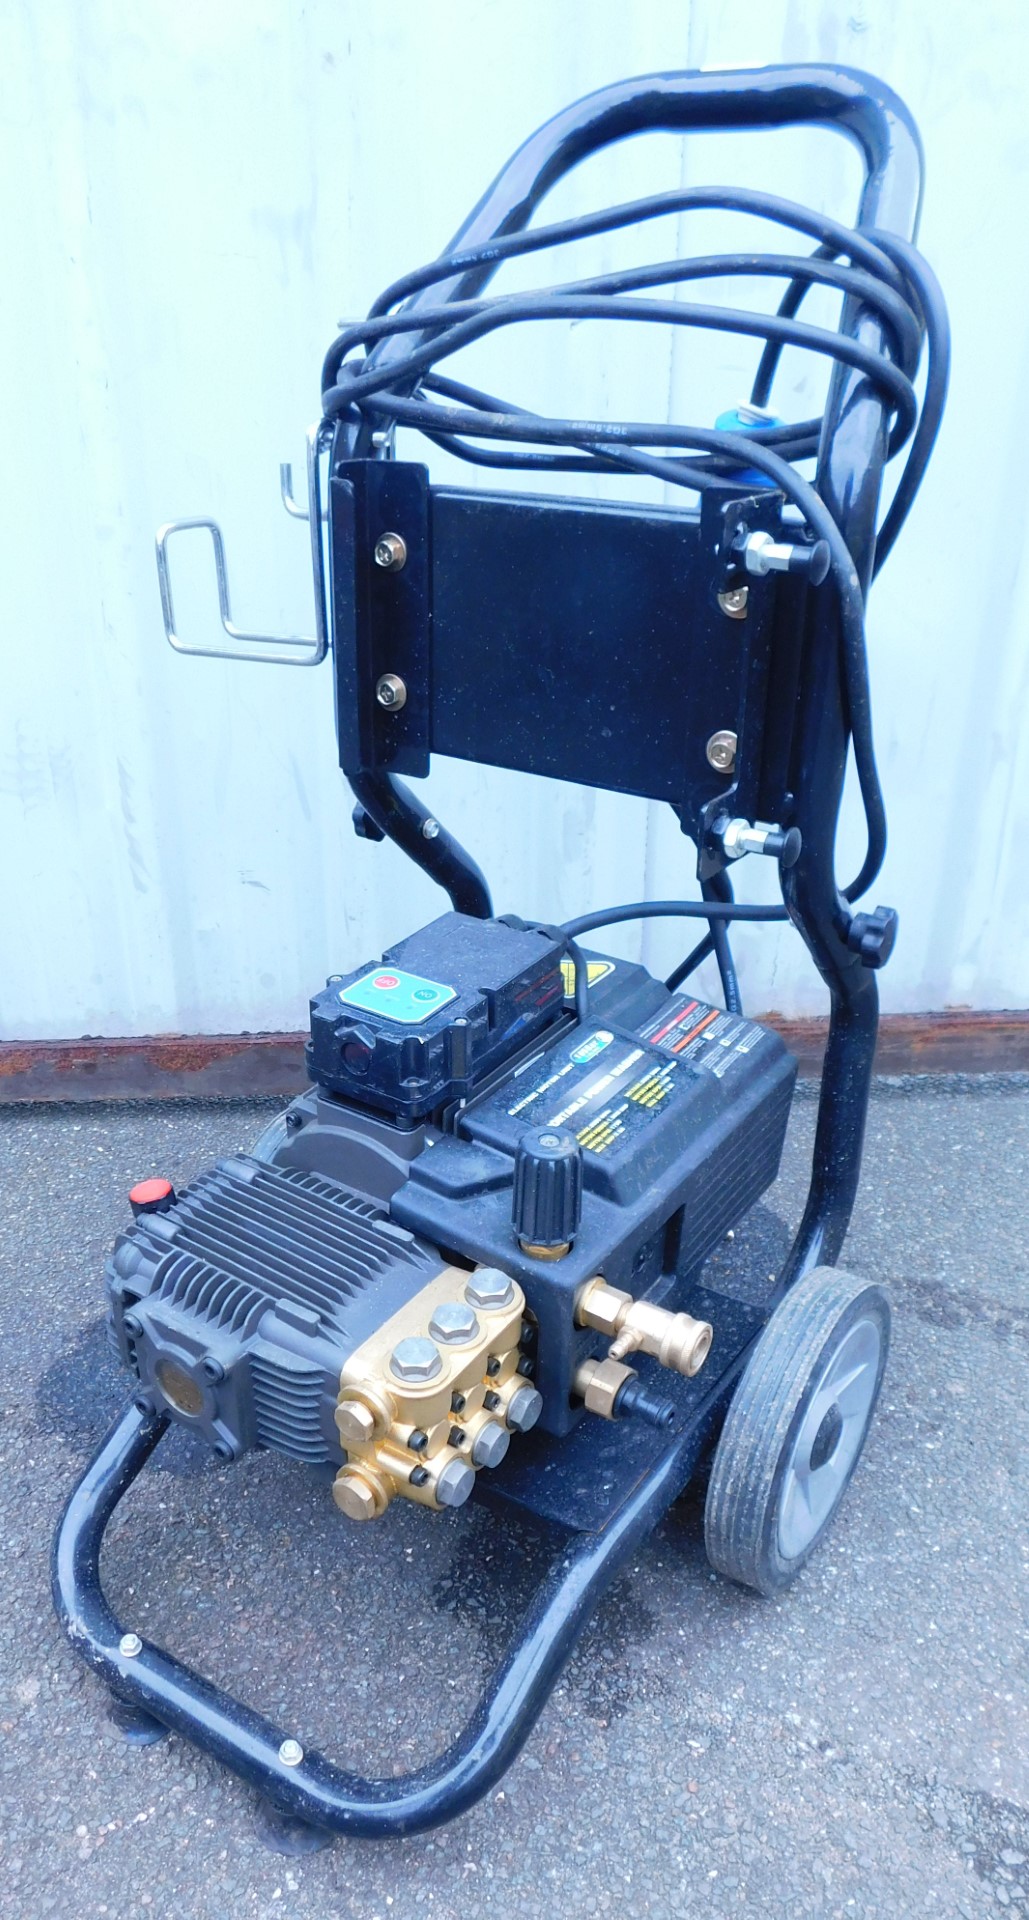 An electric motor unit for portable power washer.